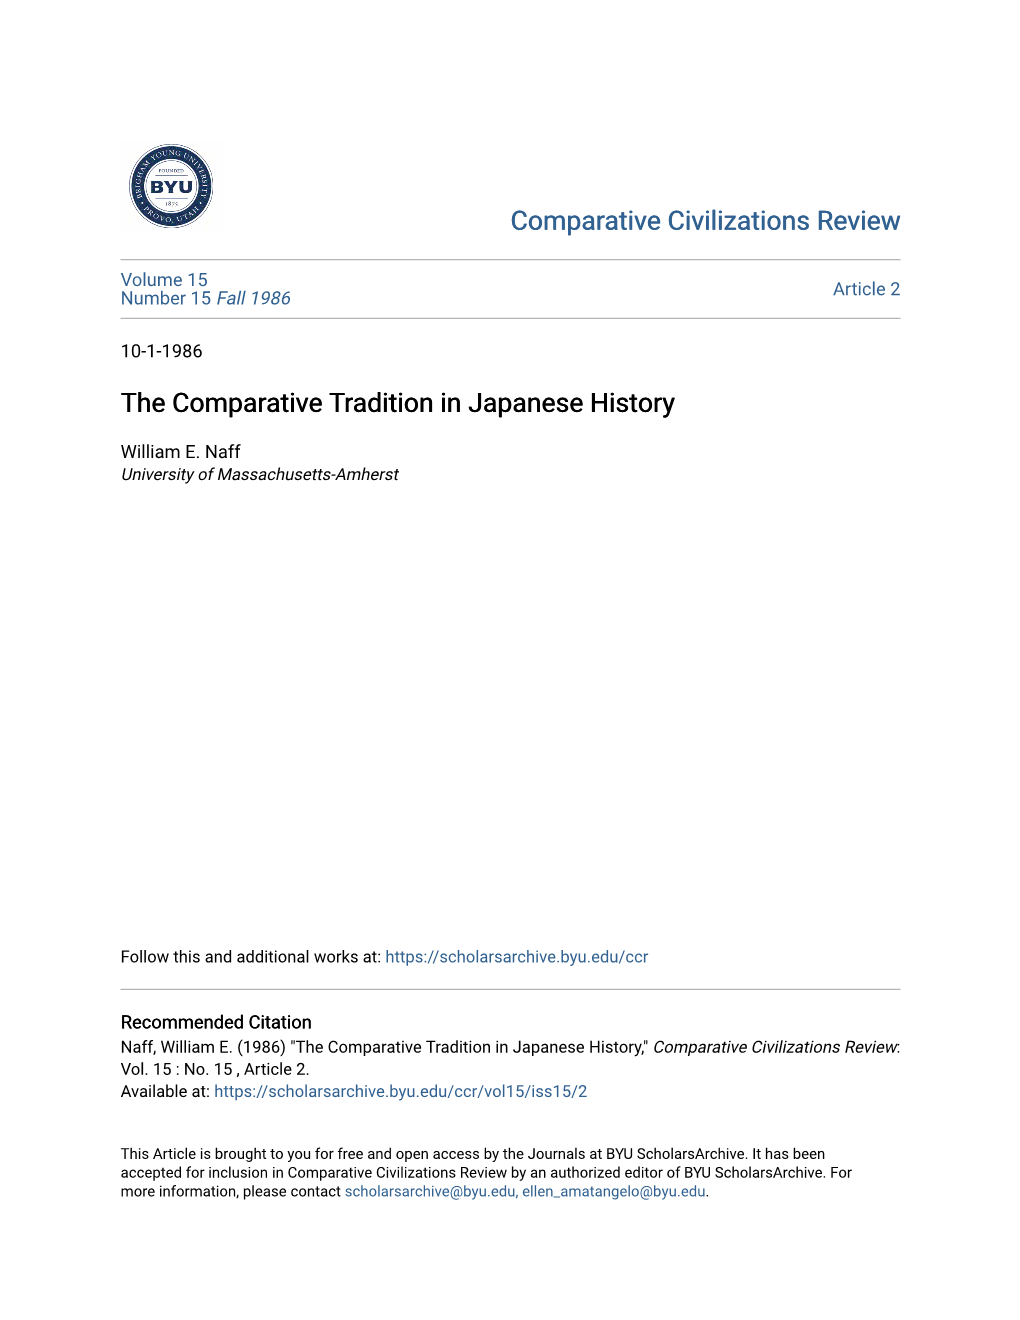 The Comparative Tradition in Japanese History